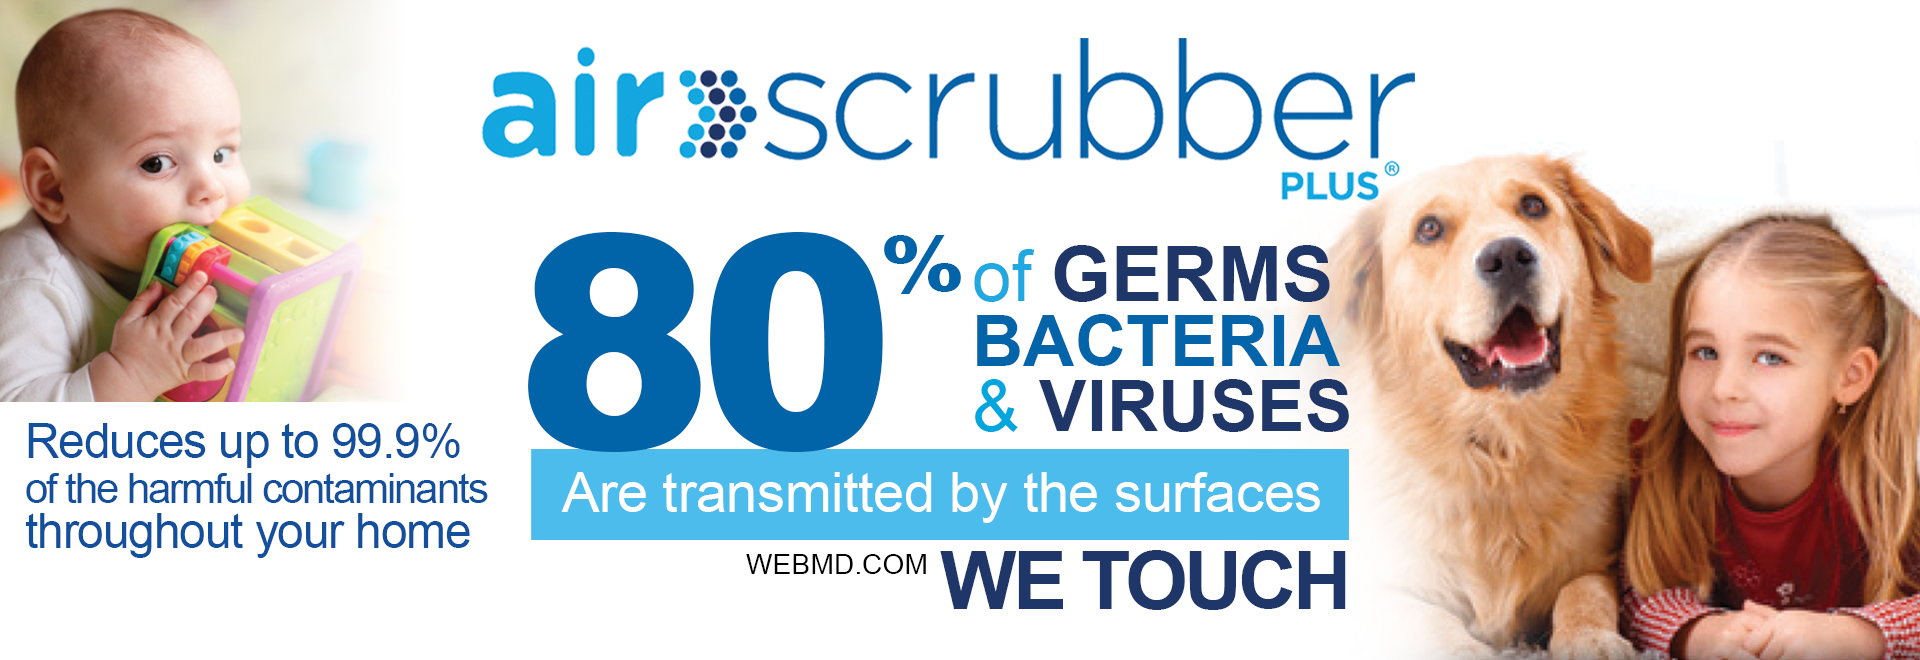 Air Scrubber reduces germs, bacteria, and virus by eighty percent